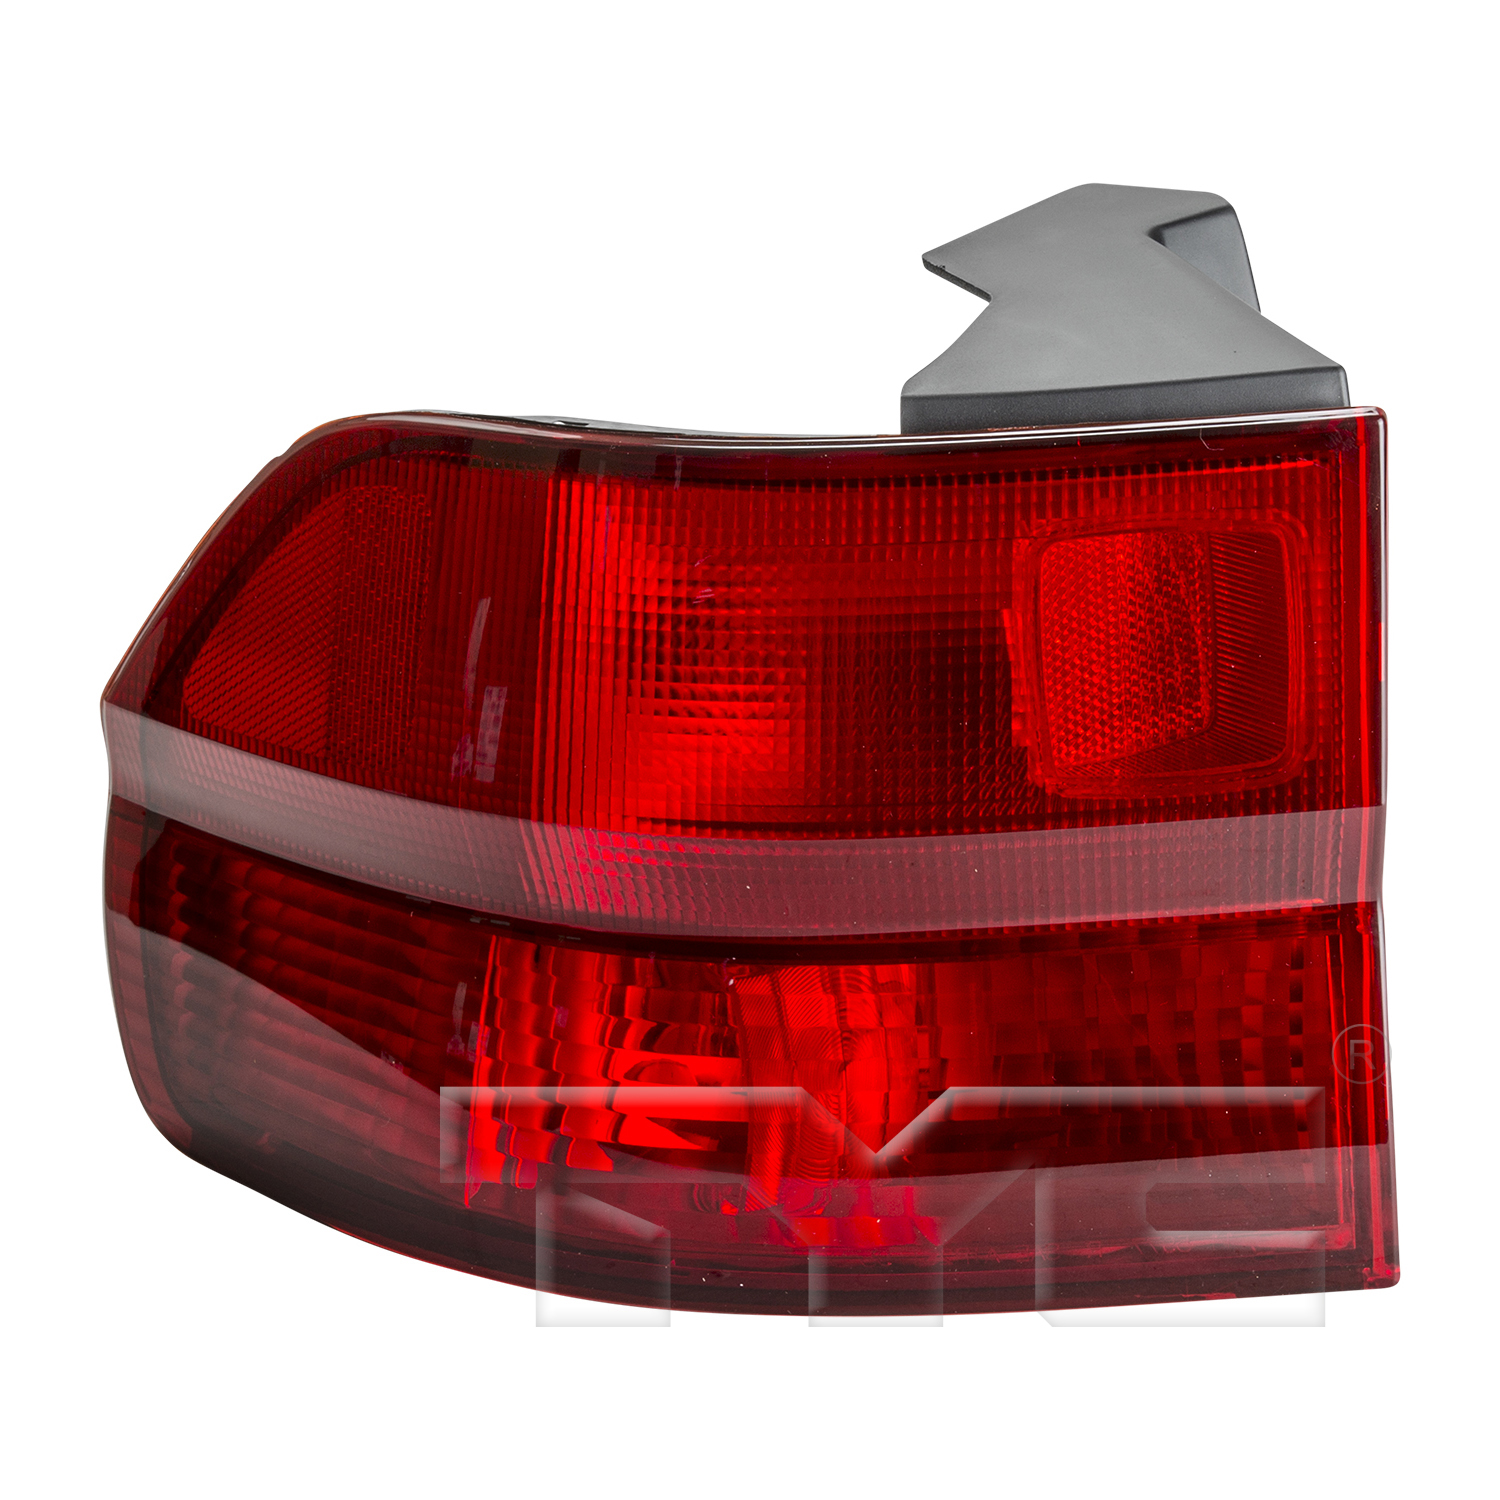 Aftermarket TAILLIGHTS for HONDA - ODYSSEY, ODYSSEY,99-01,LT Taillamp lens/housing